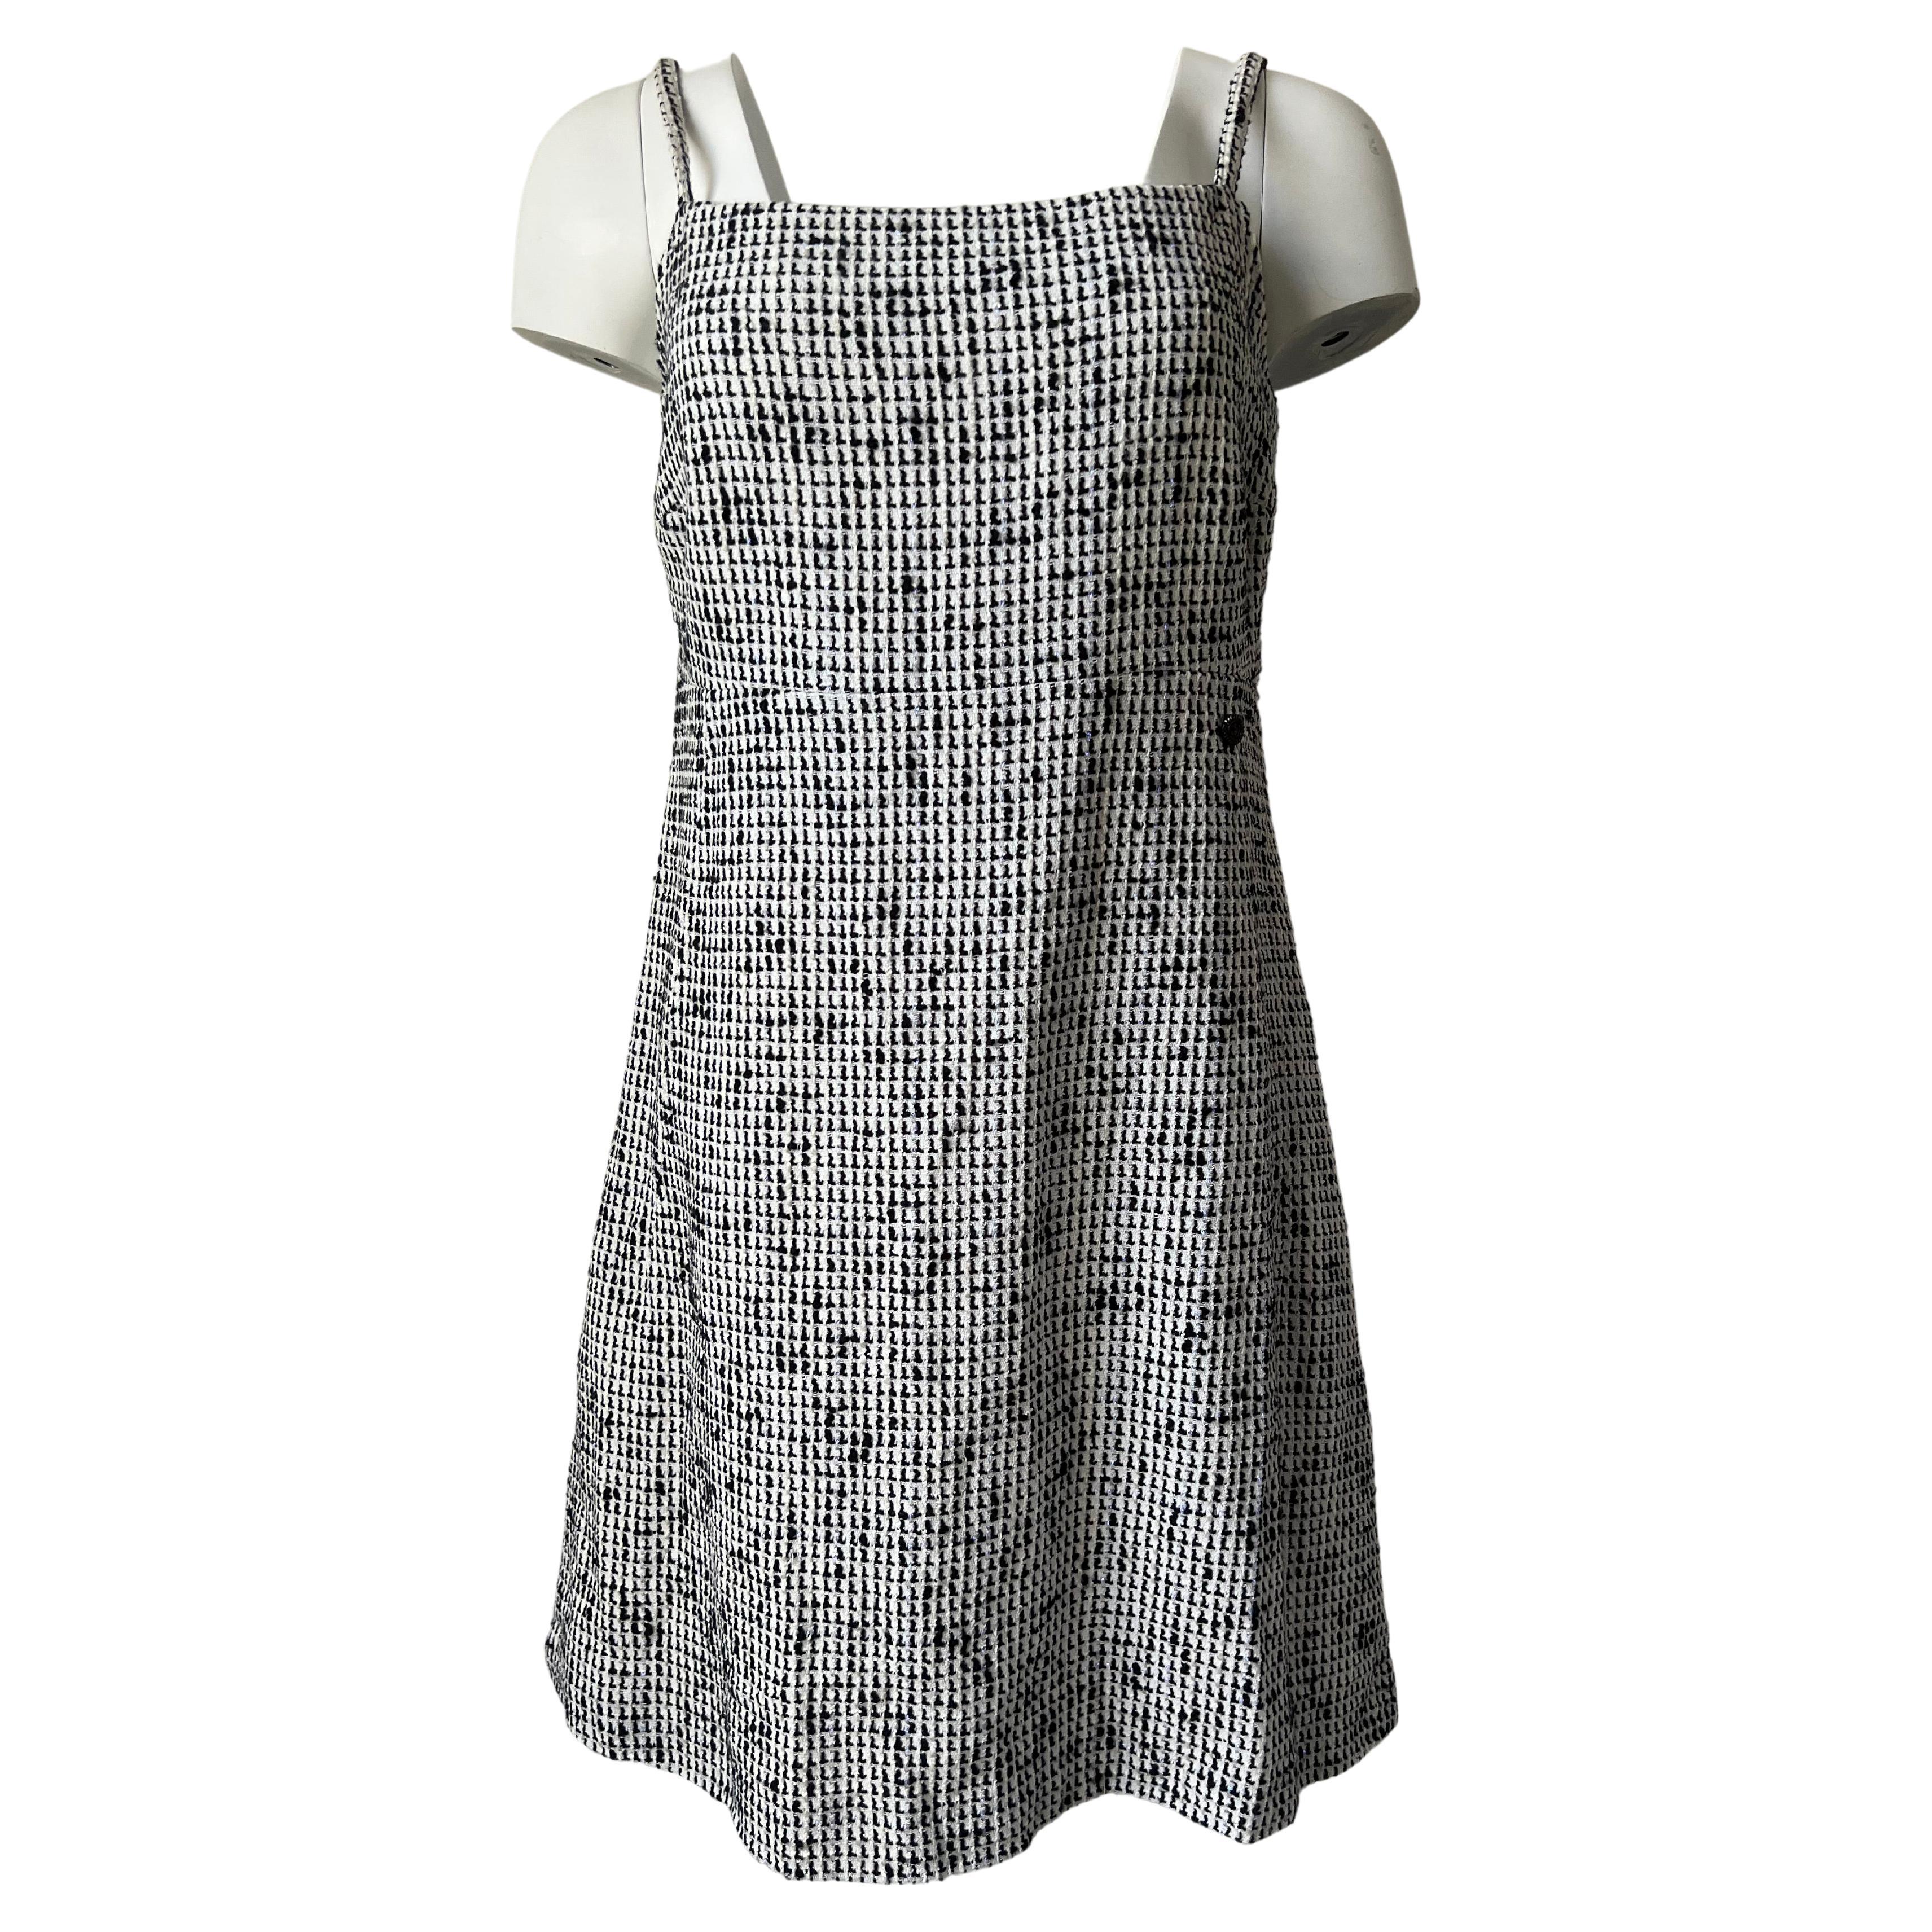 Black and White Tweed Dress Chanel 2010